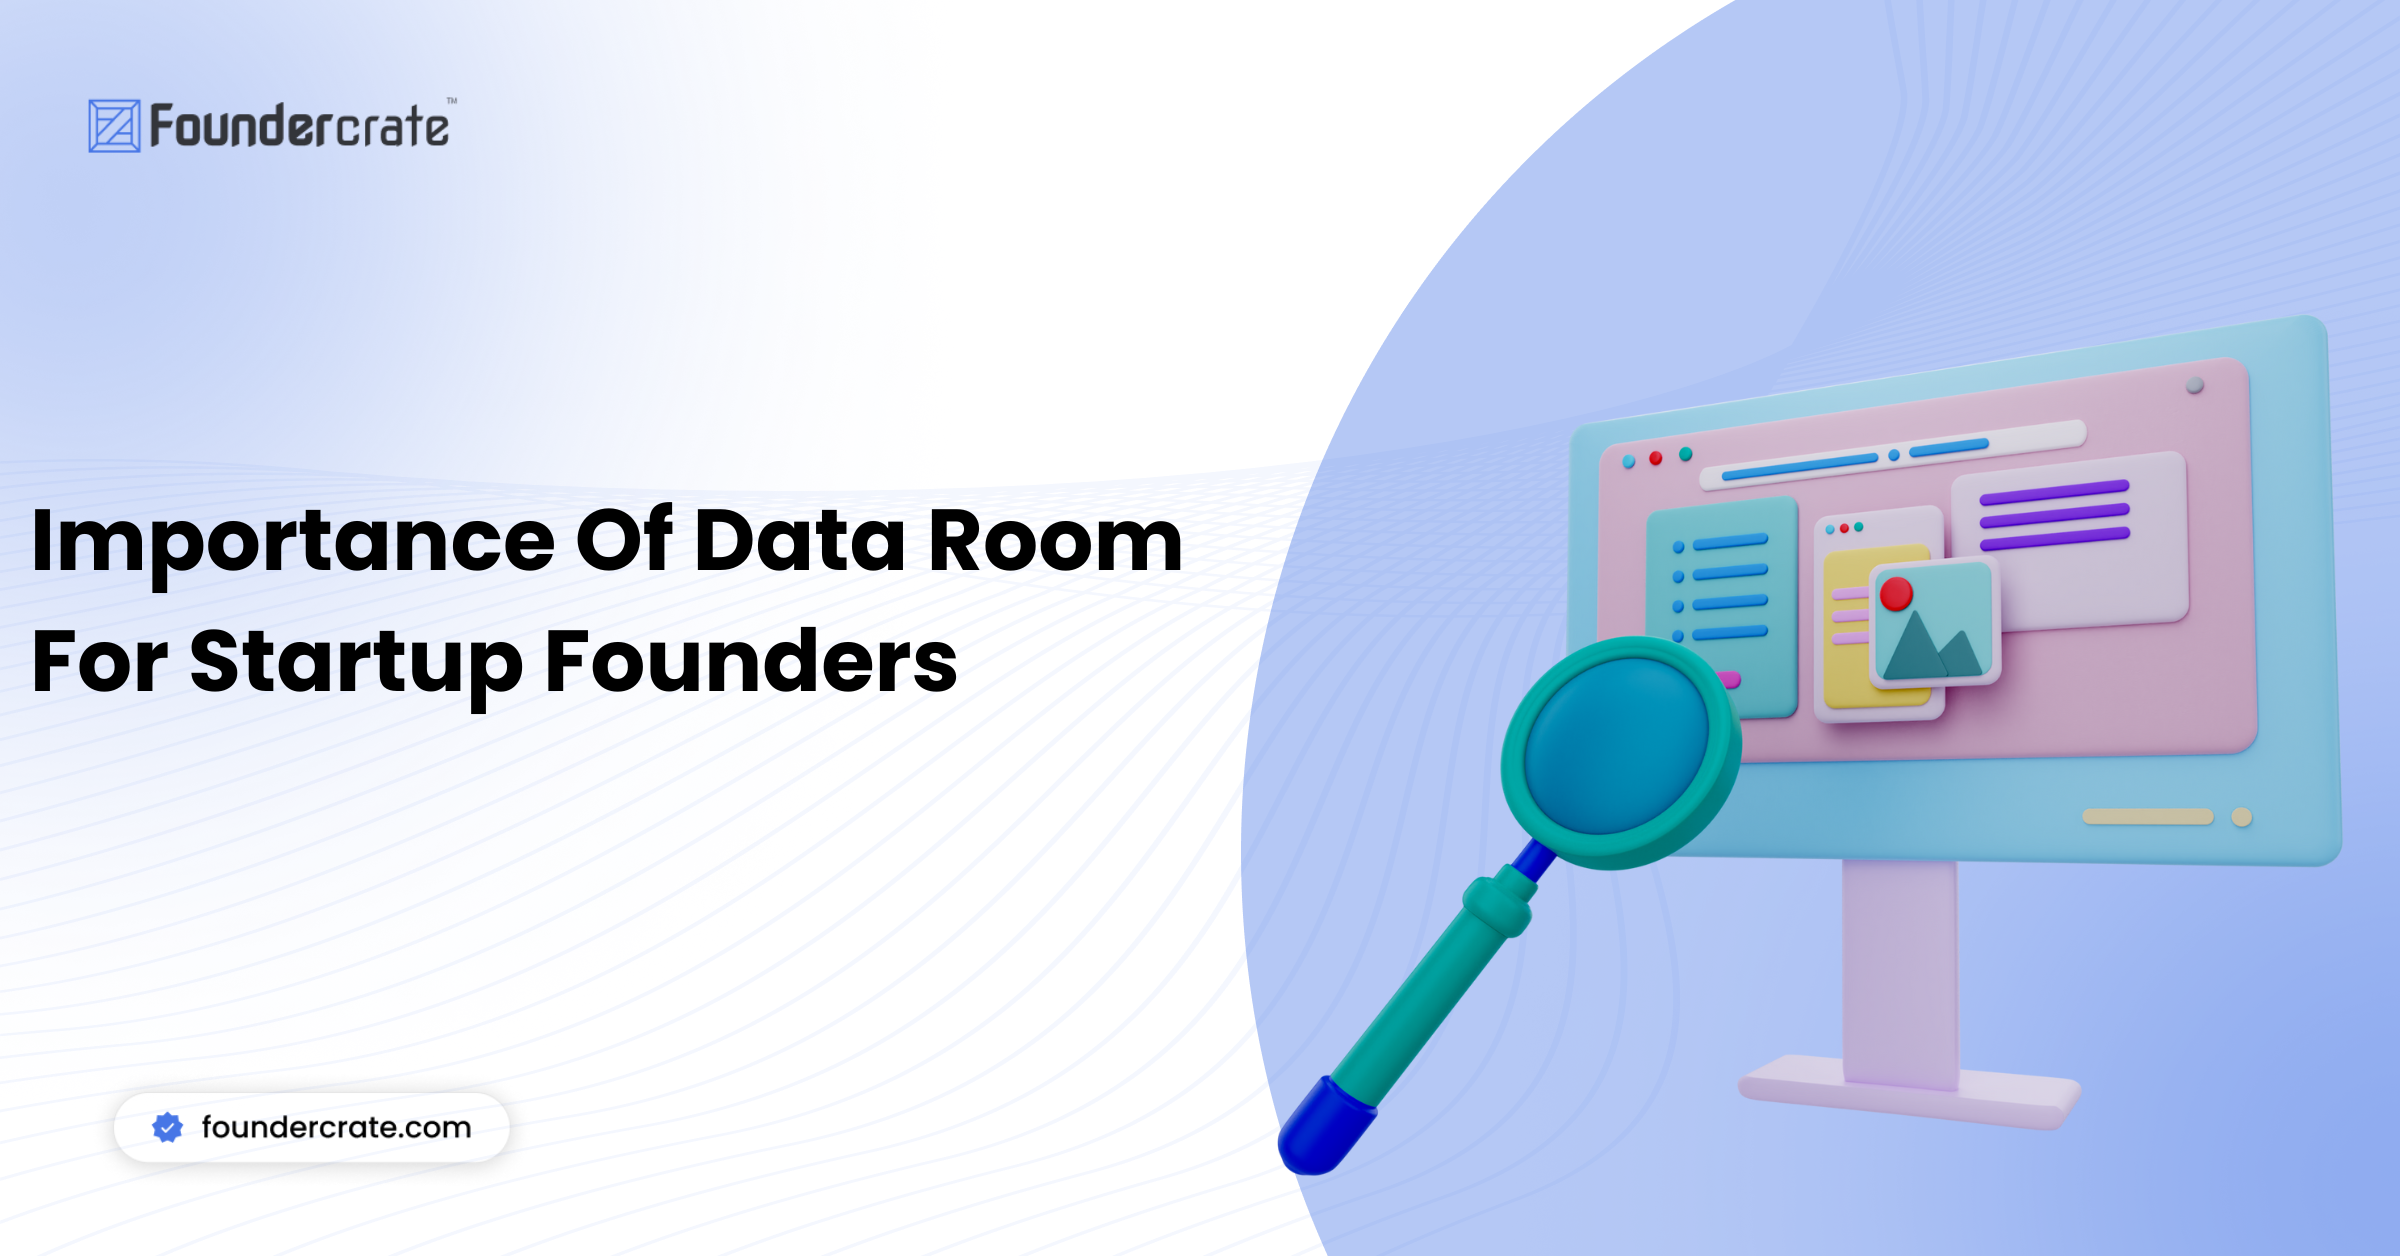 Importance Of Data Room For Startup Founders